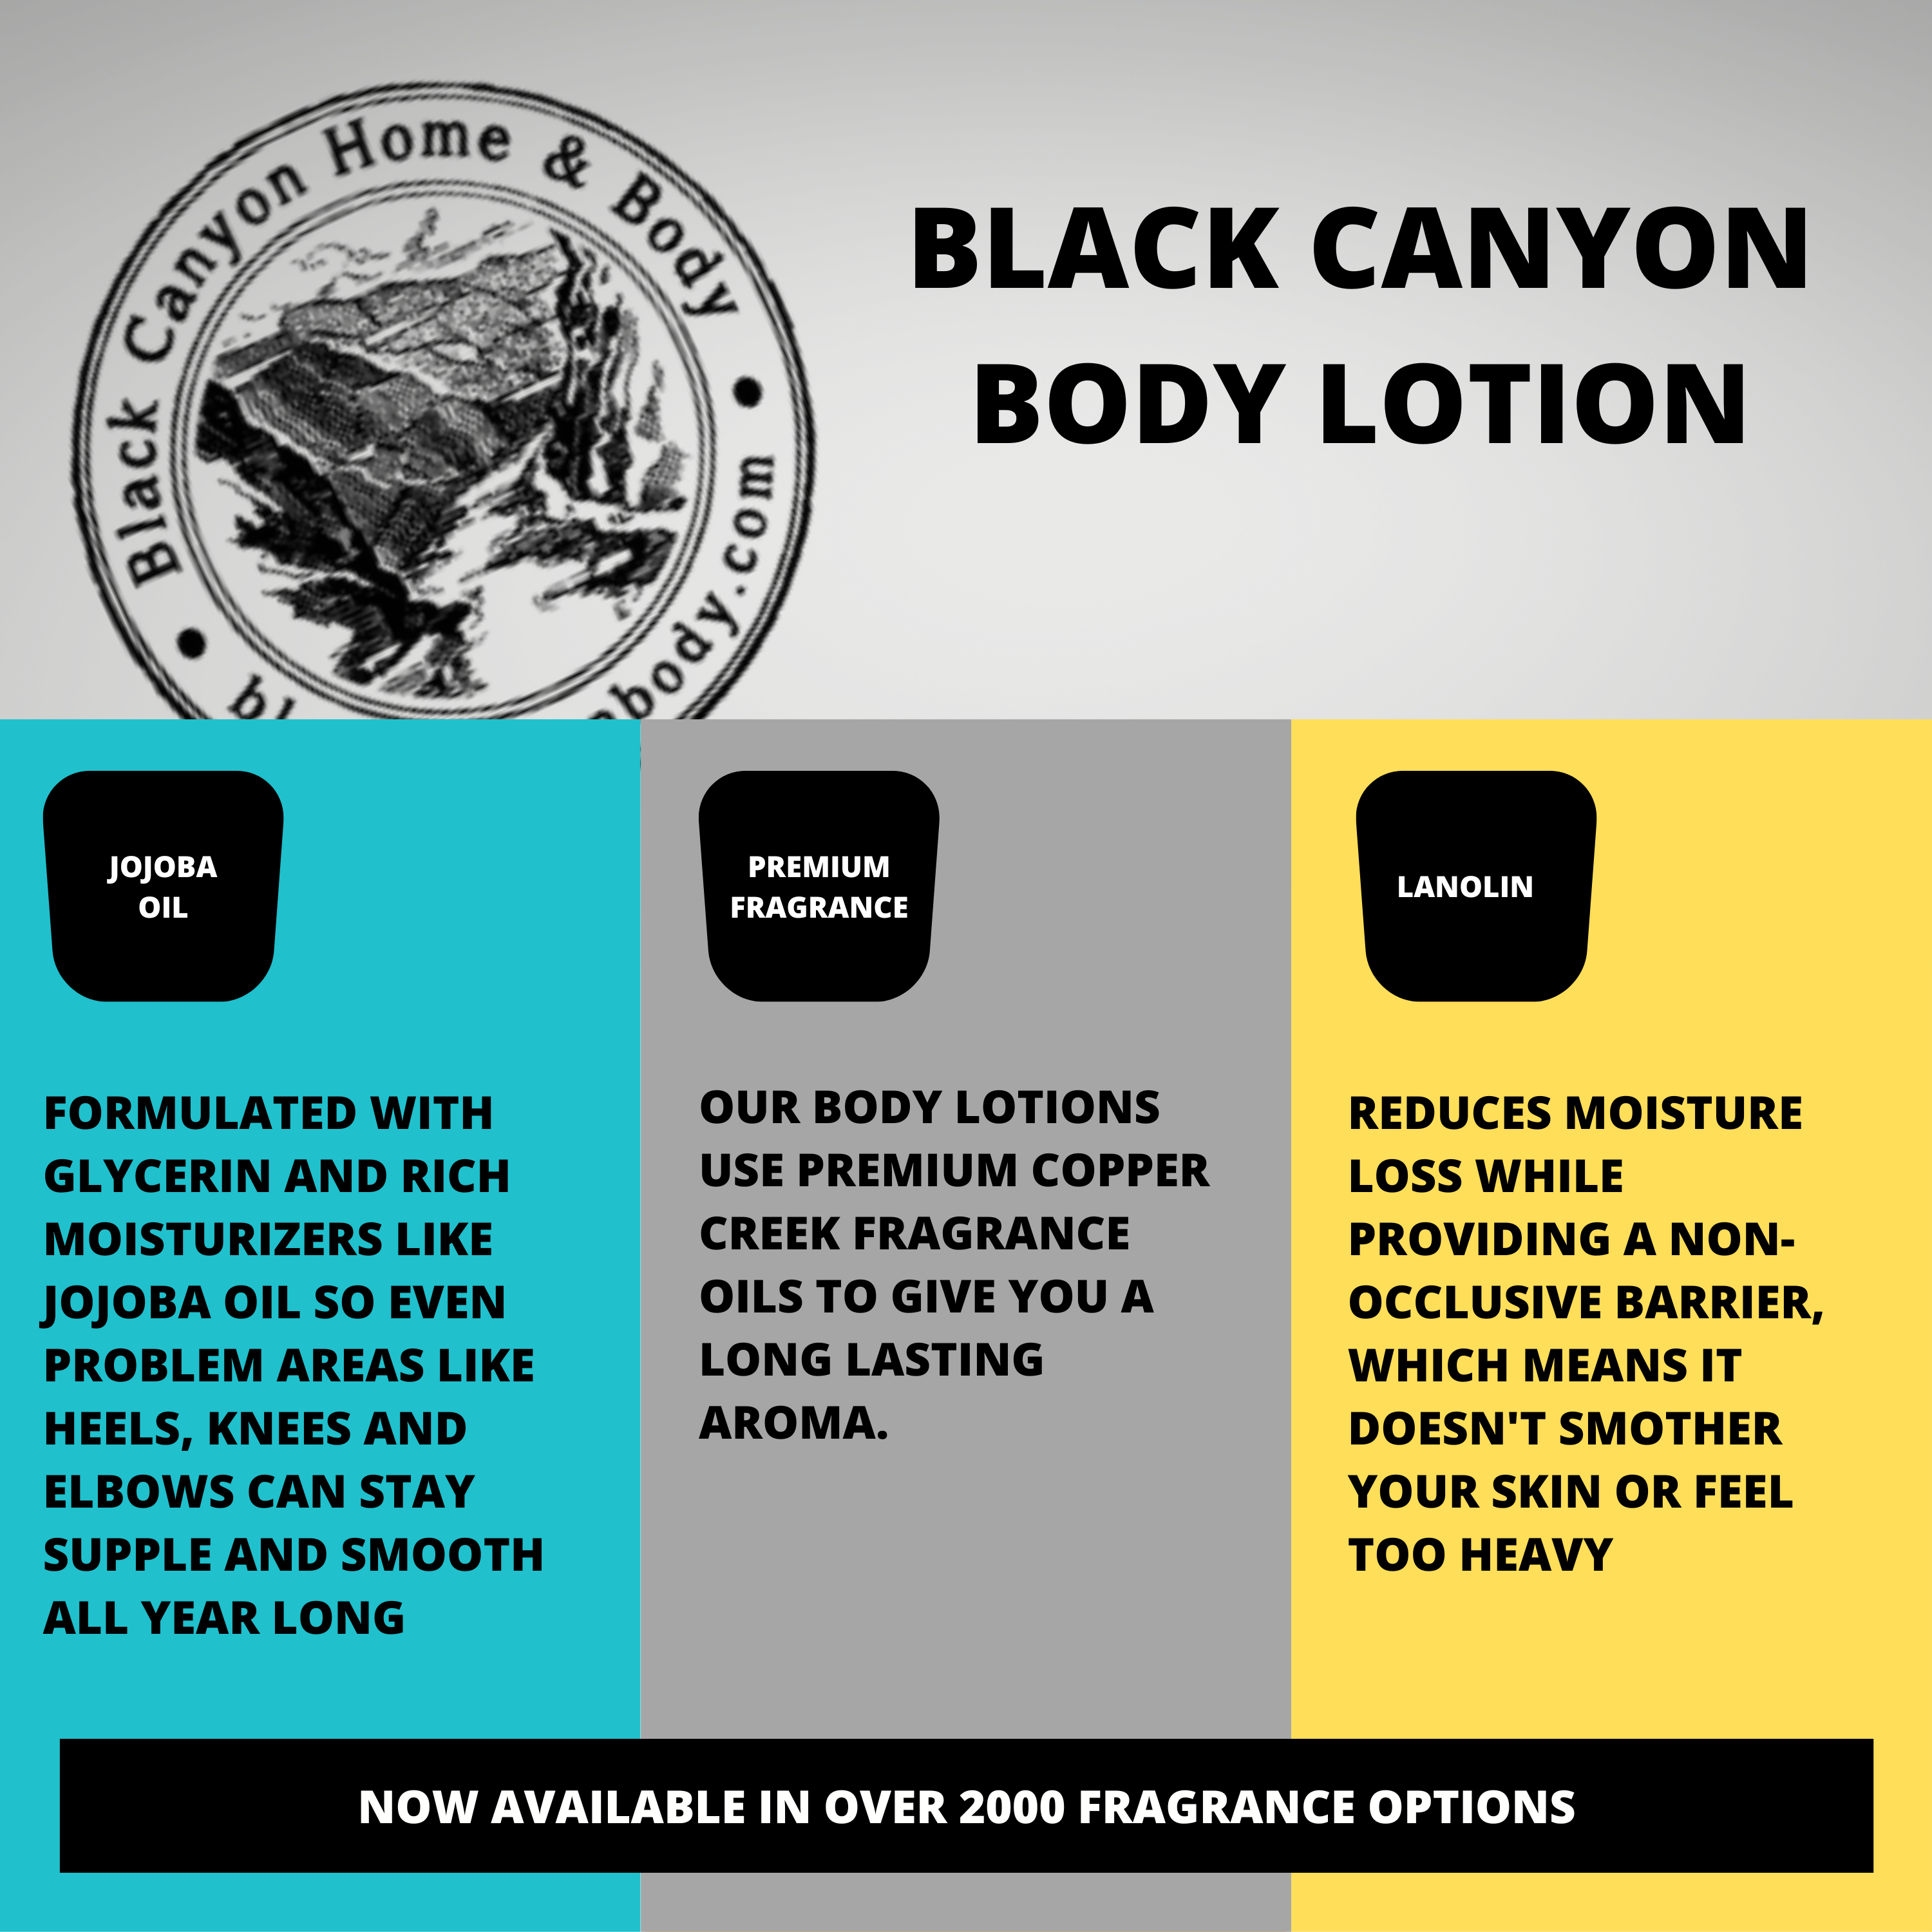 Black Canyon Berry Orchid Scented Luxury Body Lotion with Lanolin and Jojoba Oil